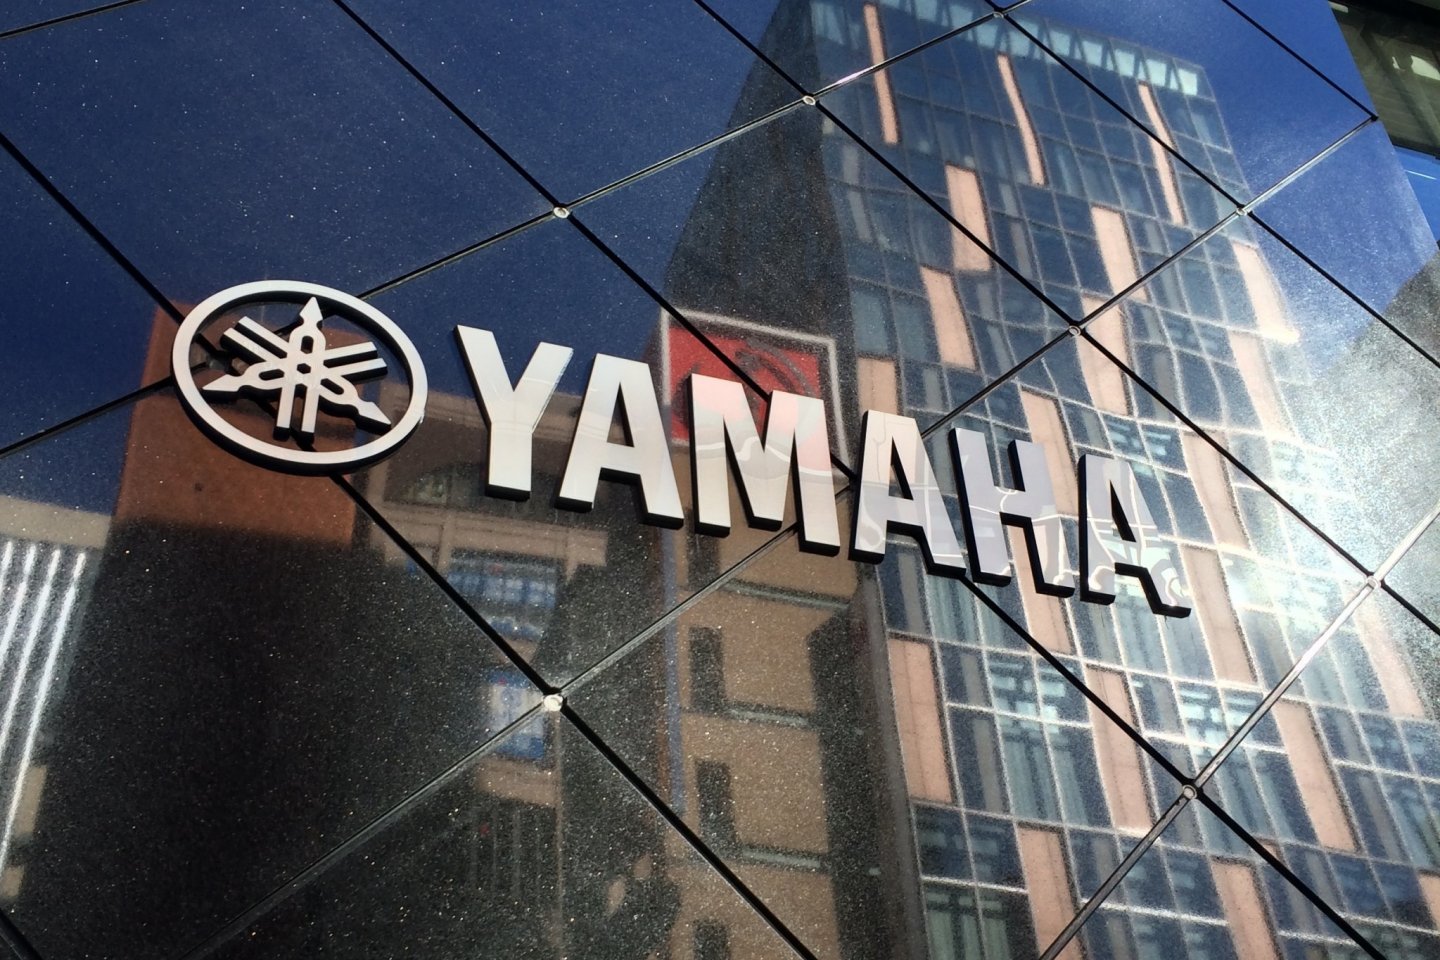 The multimillion-dollar Yamaha Ginza Flagship Store building stands as an testament to the success of the Yamaha brand.